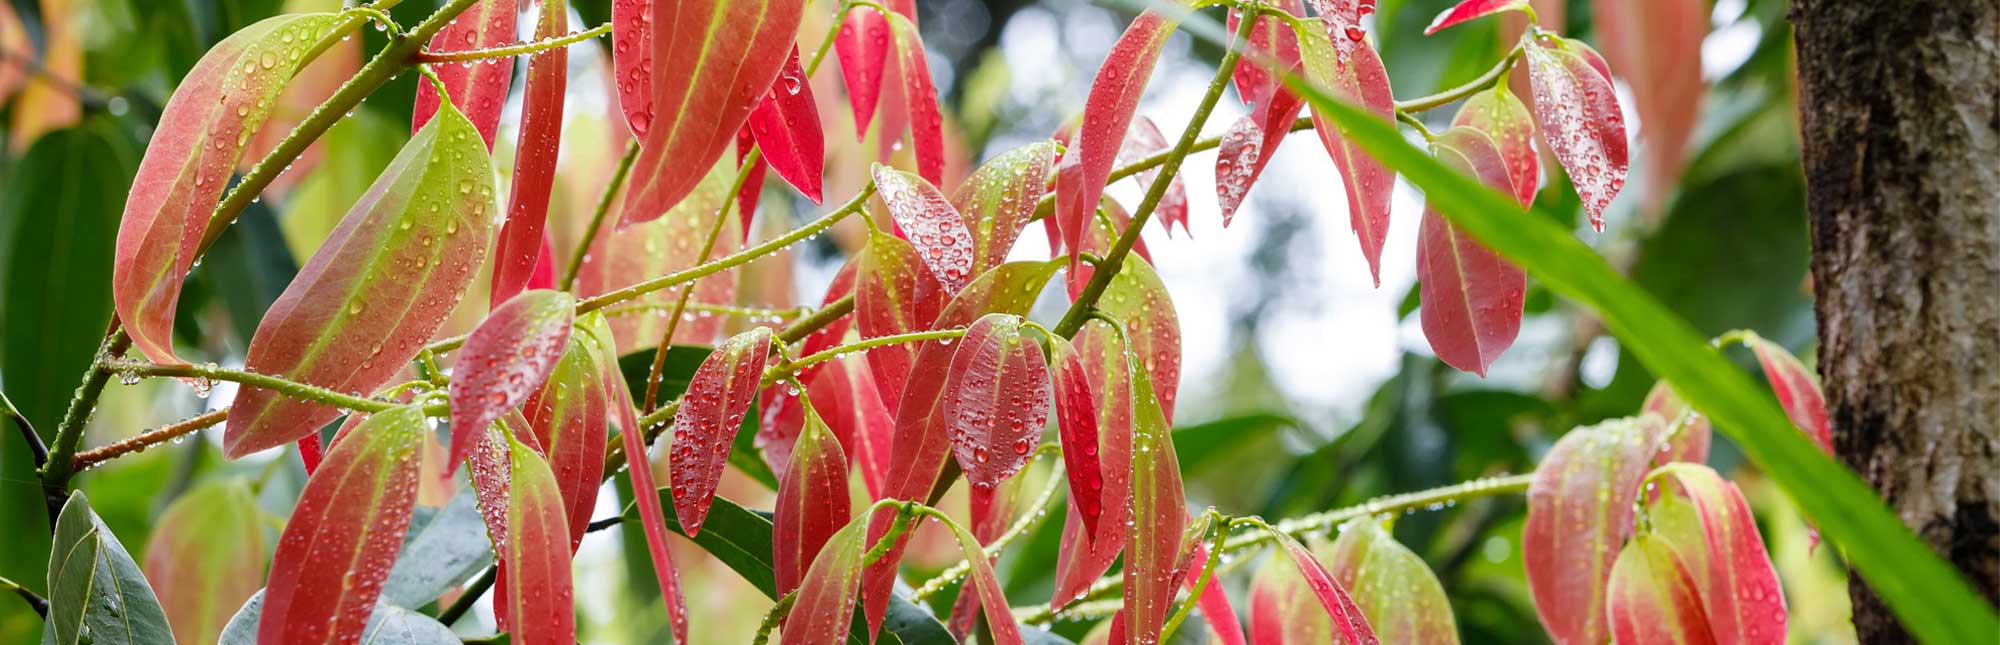 new fresh red colored leaves on Cinnamon Tree (Cinnamomum zeylanicum), Highly ornamental tree and the source of cinnamon spice. Masoala forest national park, Madagascar wilderness